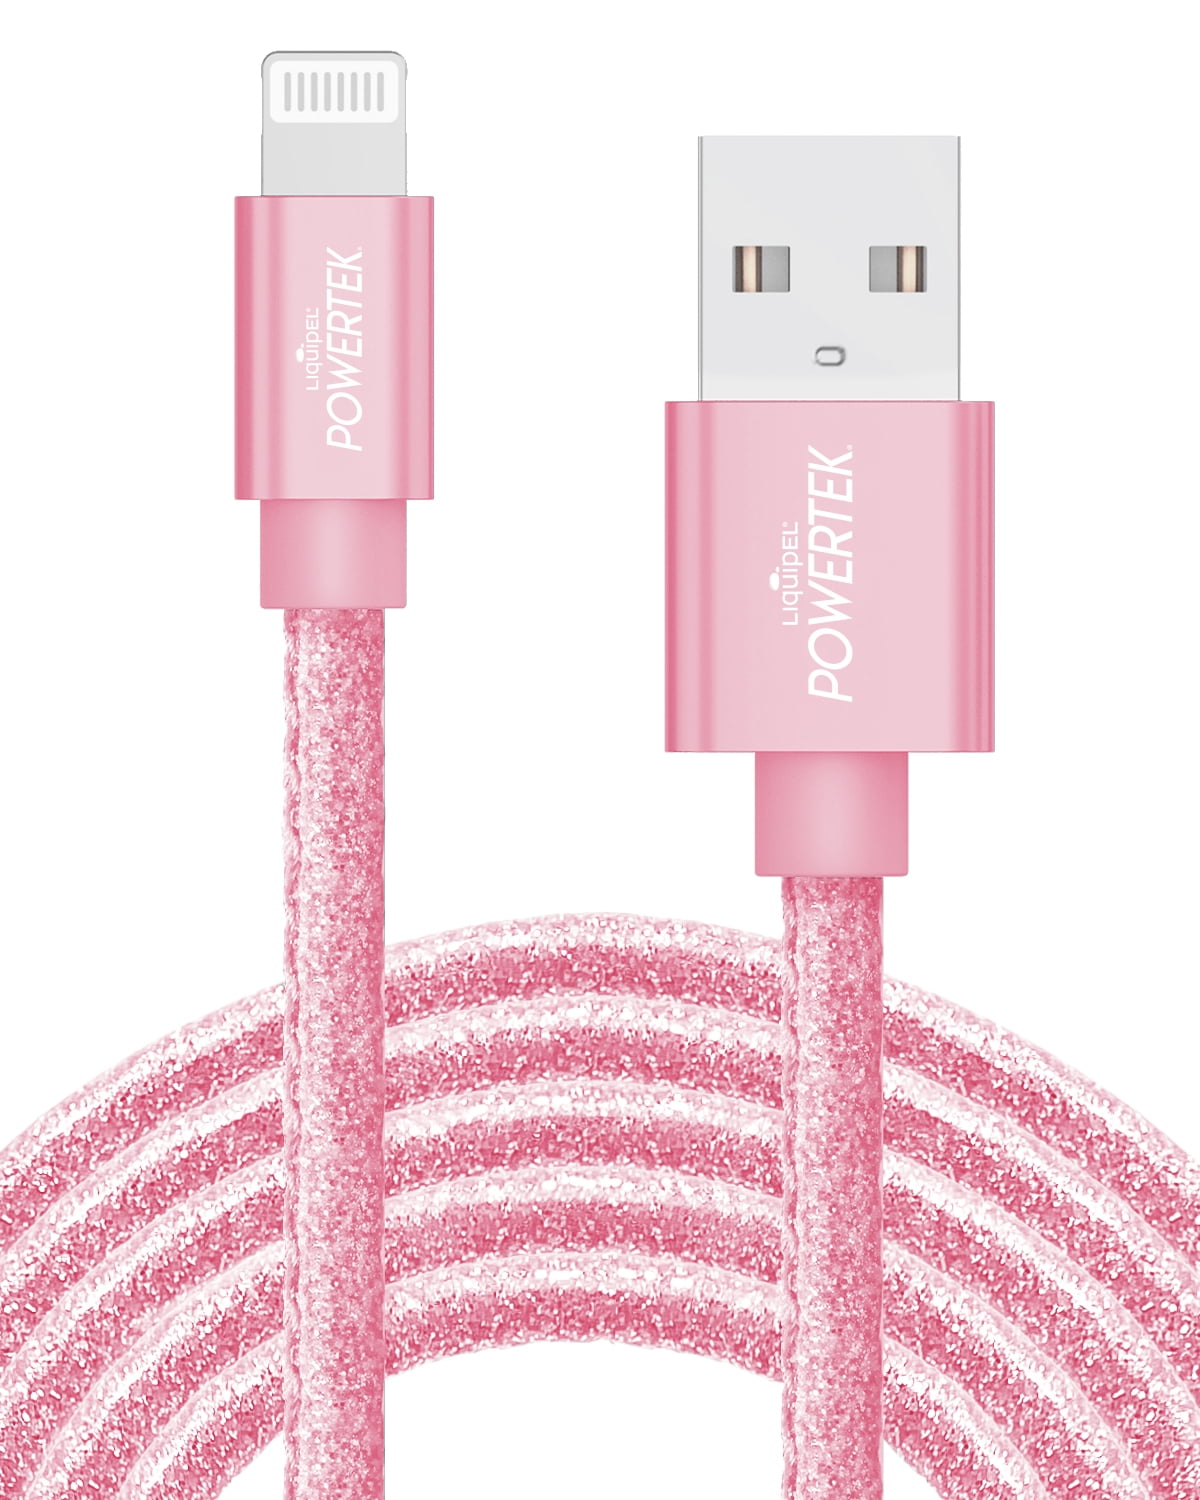 Liquipel Powertek iPad & iPhone Charger Cable, Fast Charging 6ft MFI  Certified Lightning to USB Cord, Pastel Glitter Pink 